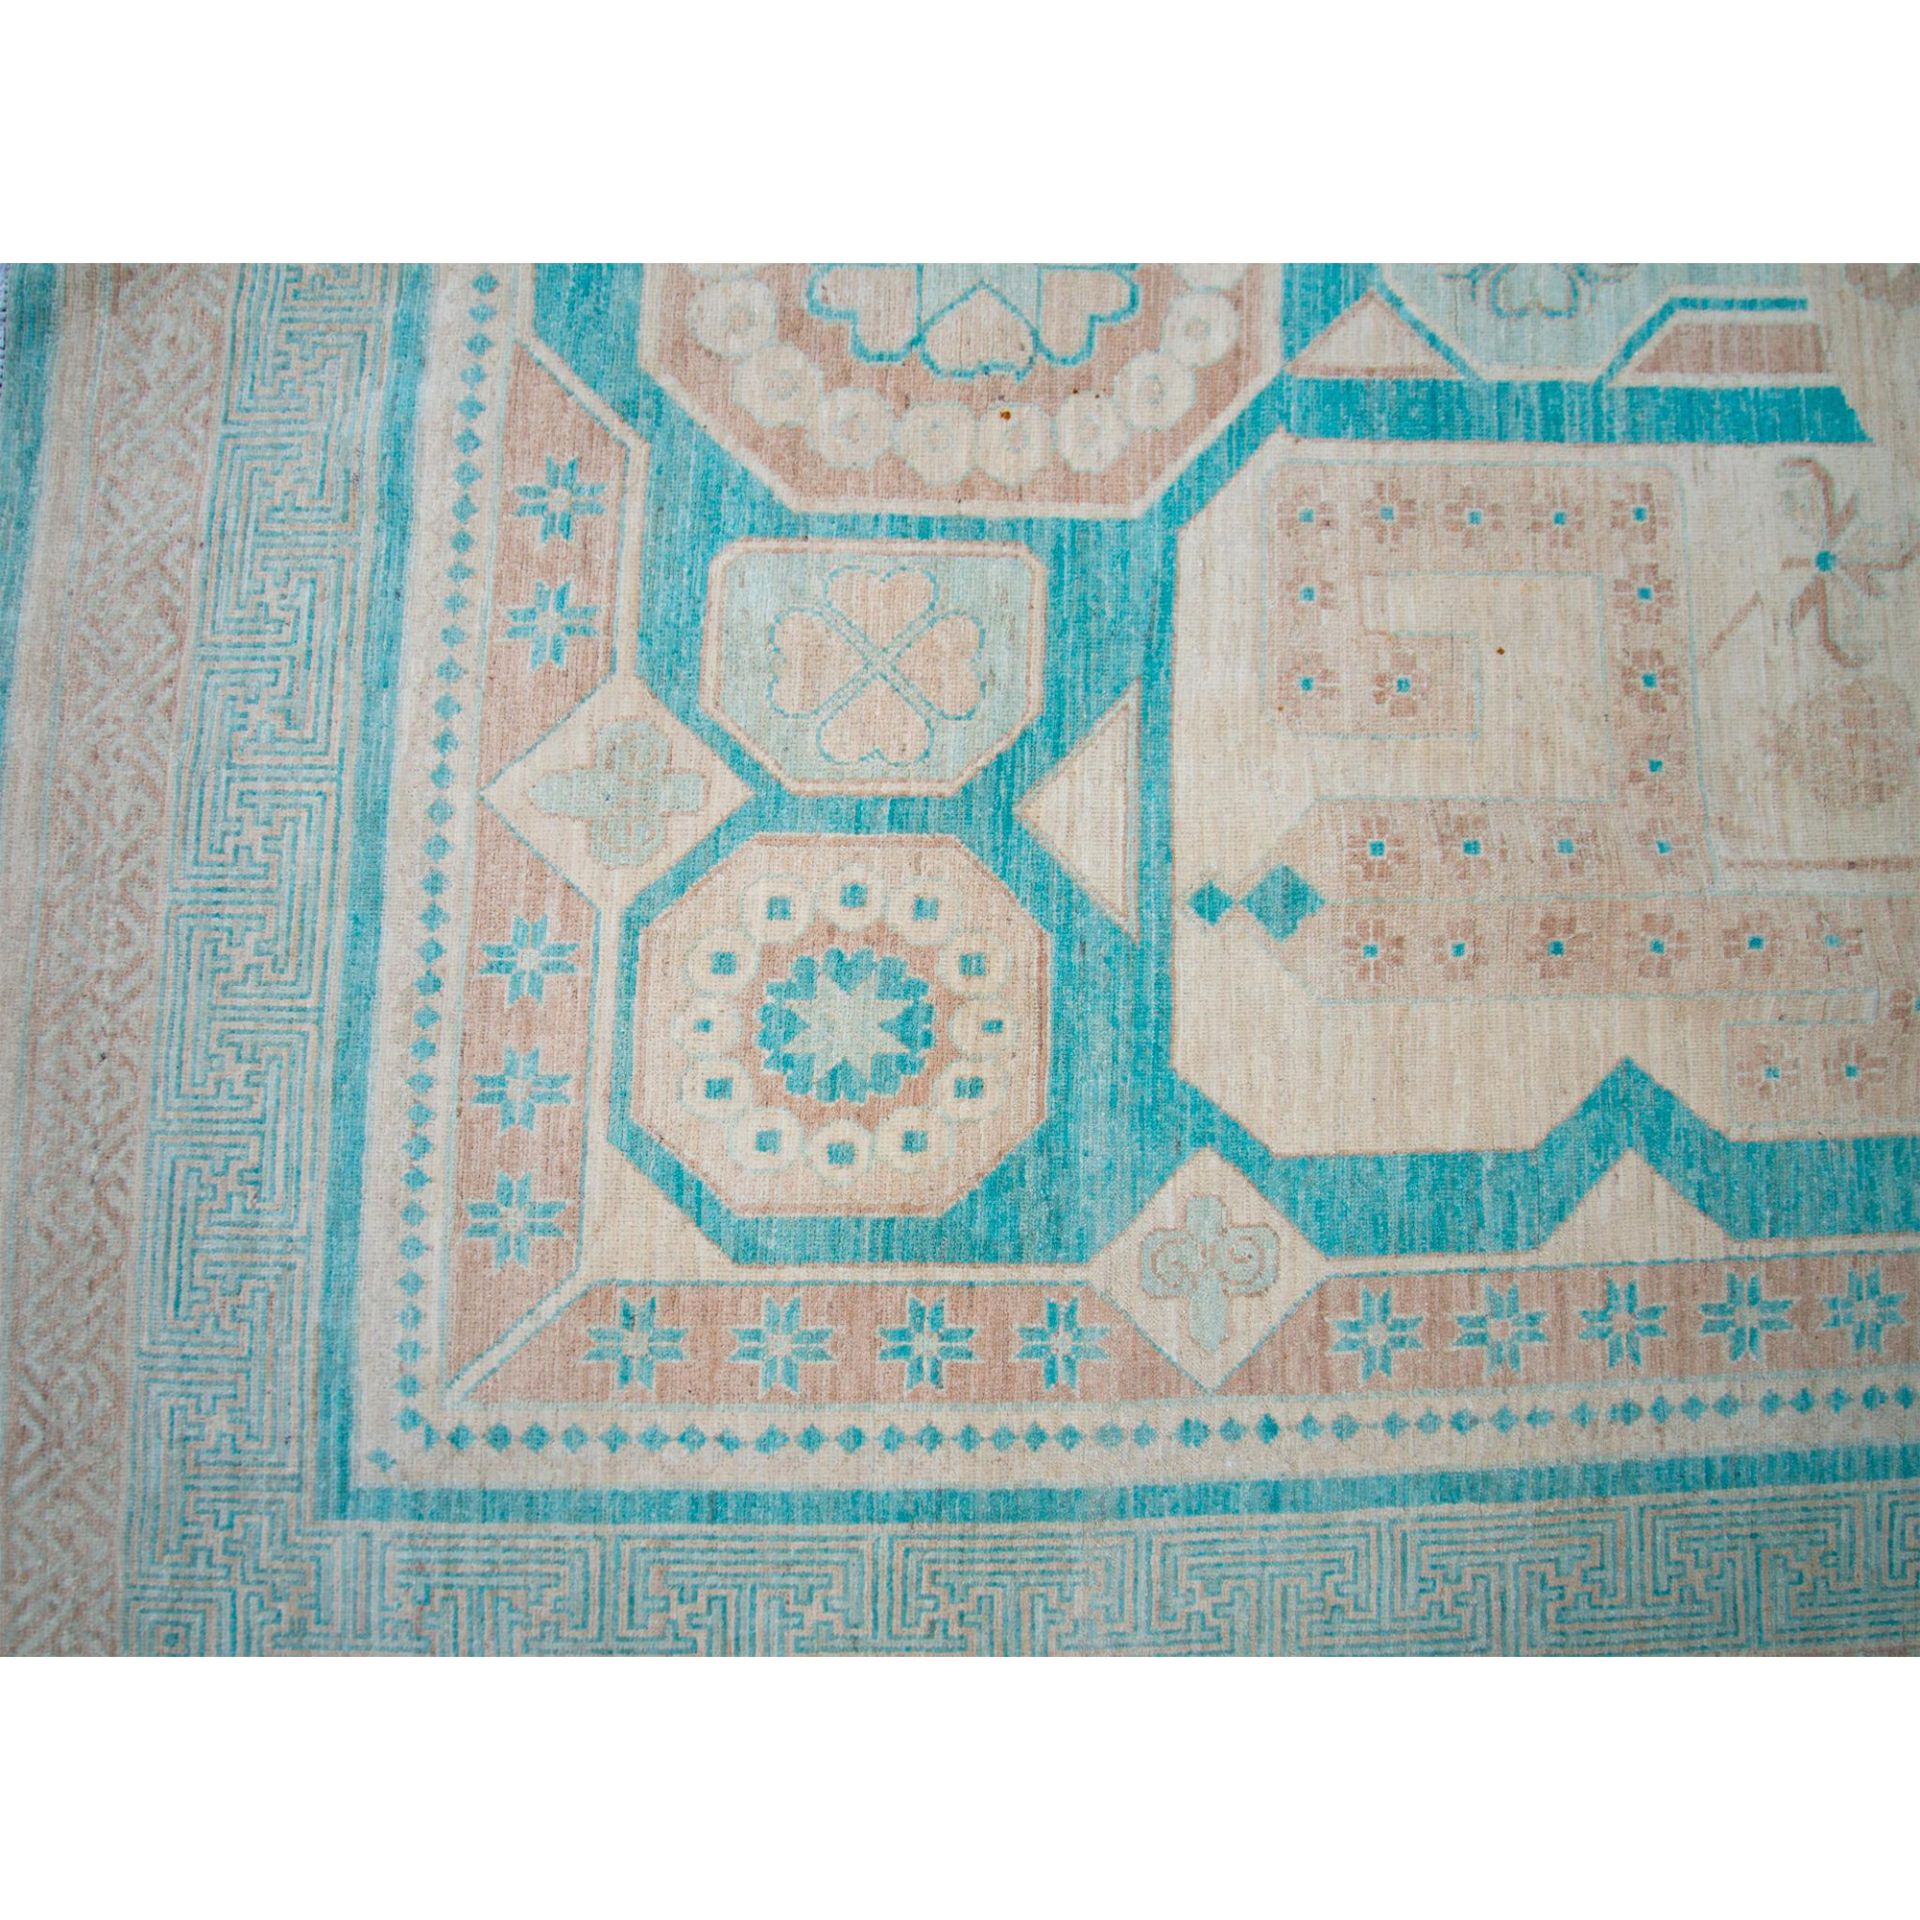 Middle Eastern 100-Percent Hand Woven Wool Rug - Image 6 of 7